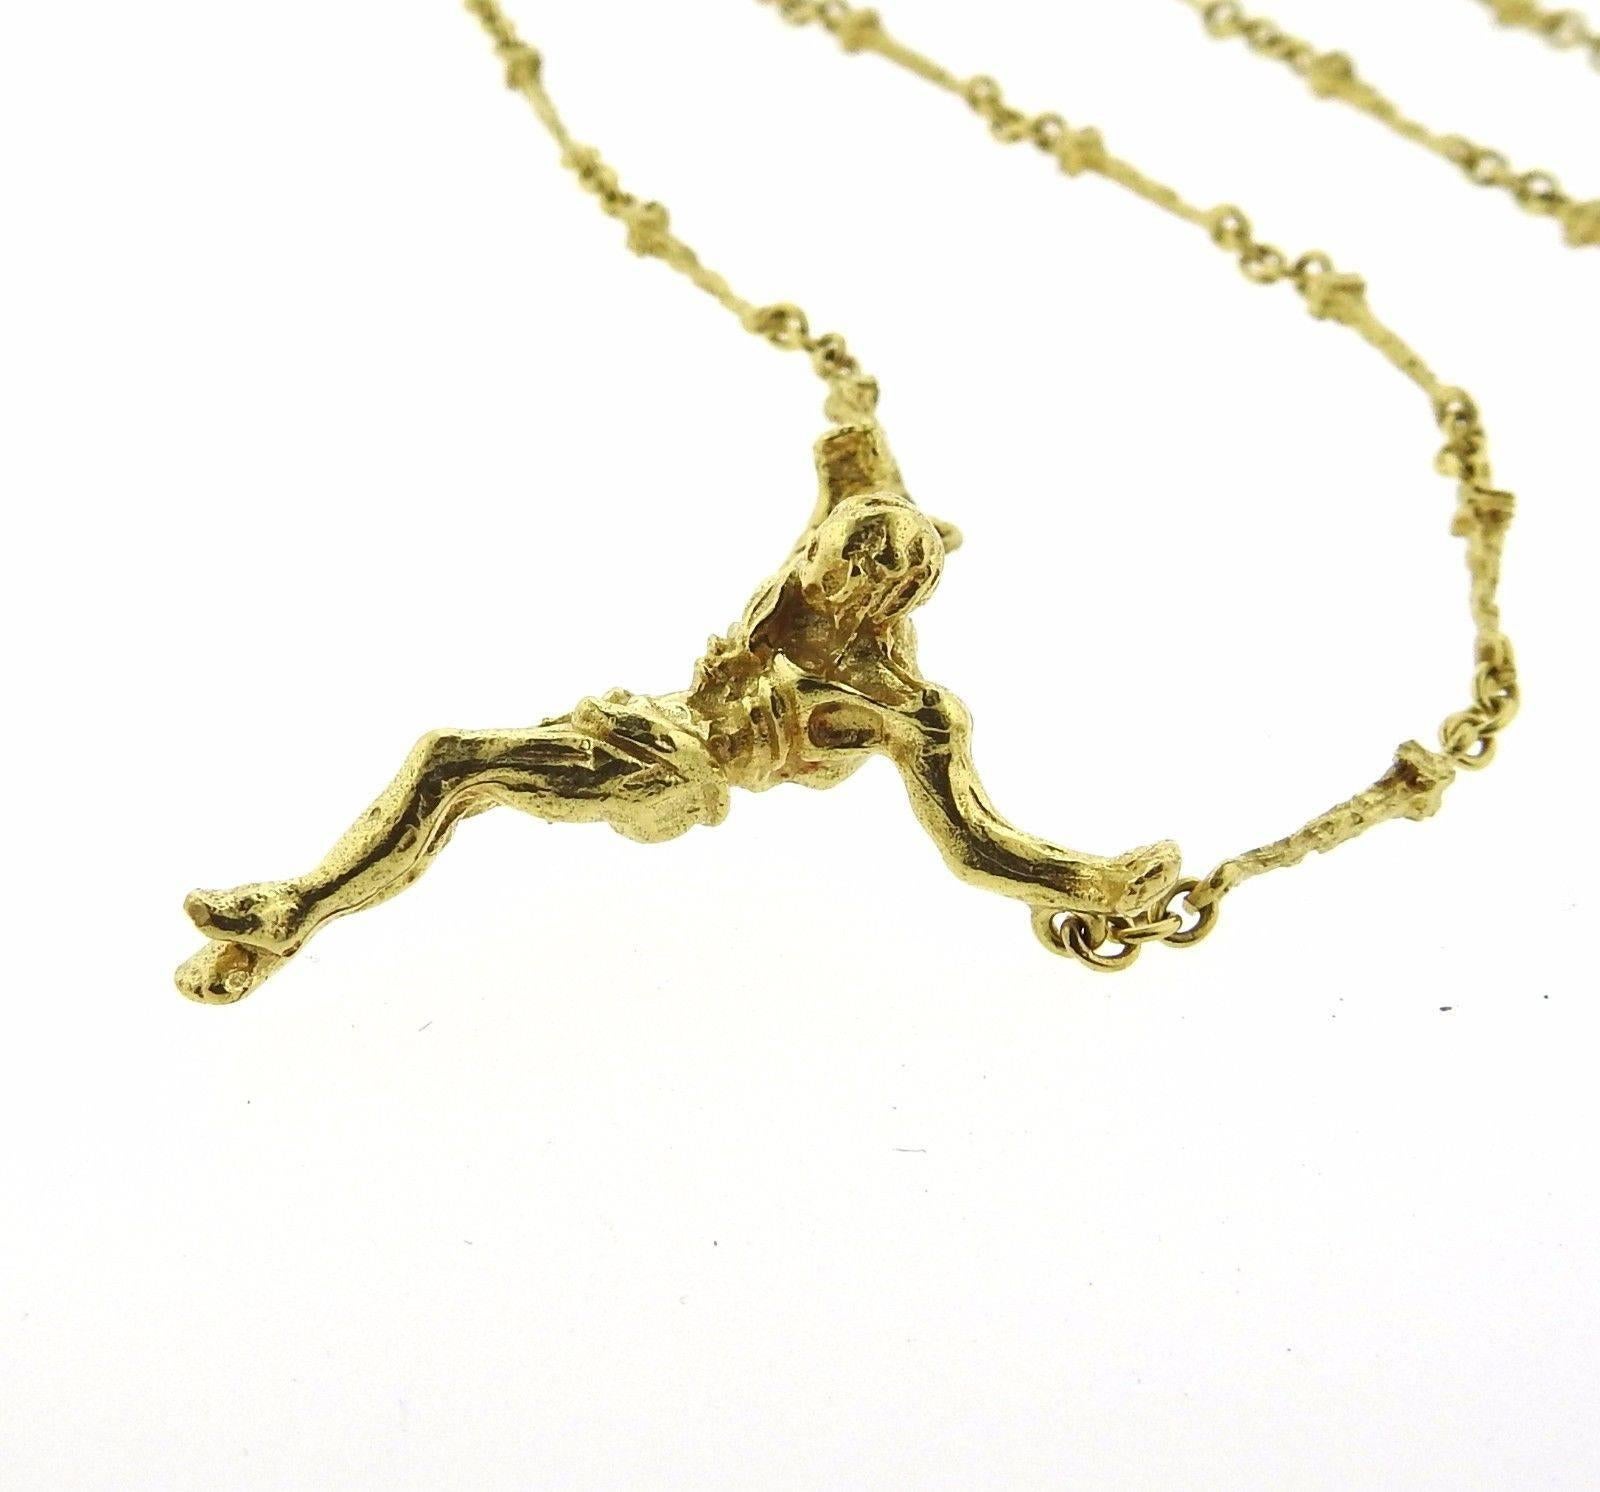 An 18k yellow gold cross pendant necklace.  The necklace is 24